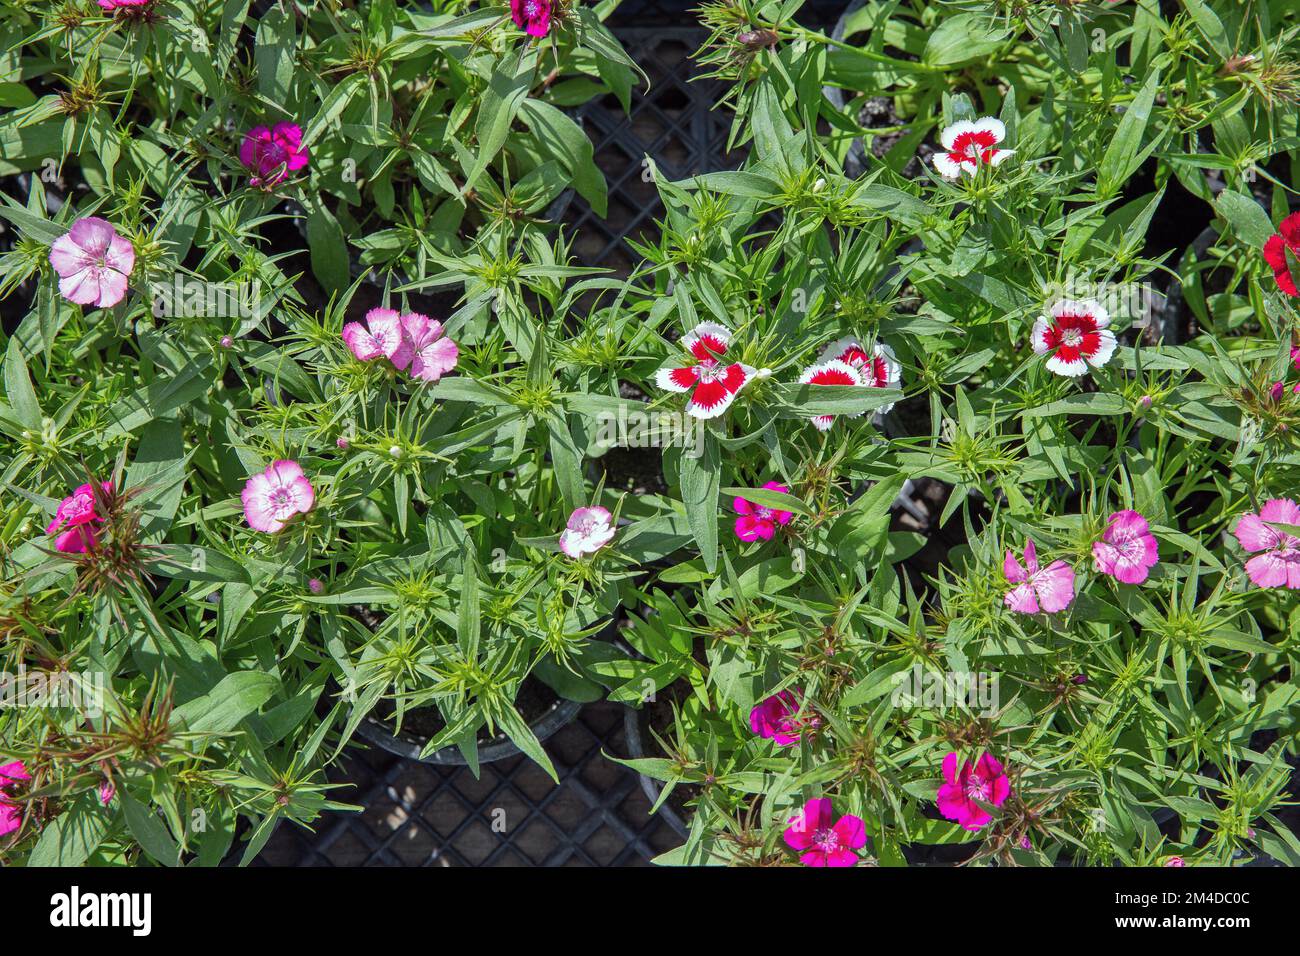 Fresh pink. red, white garden carnation flowers in plant pots in the garden center closeup. Stock Photo